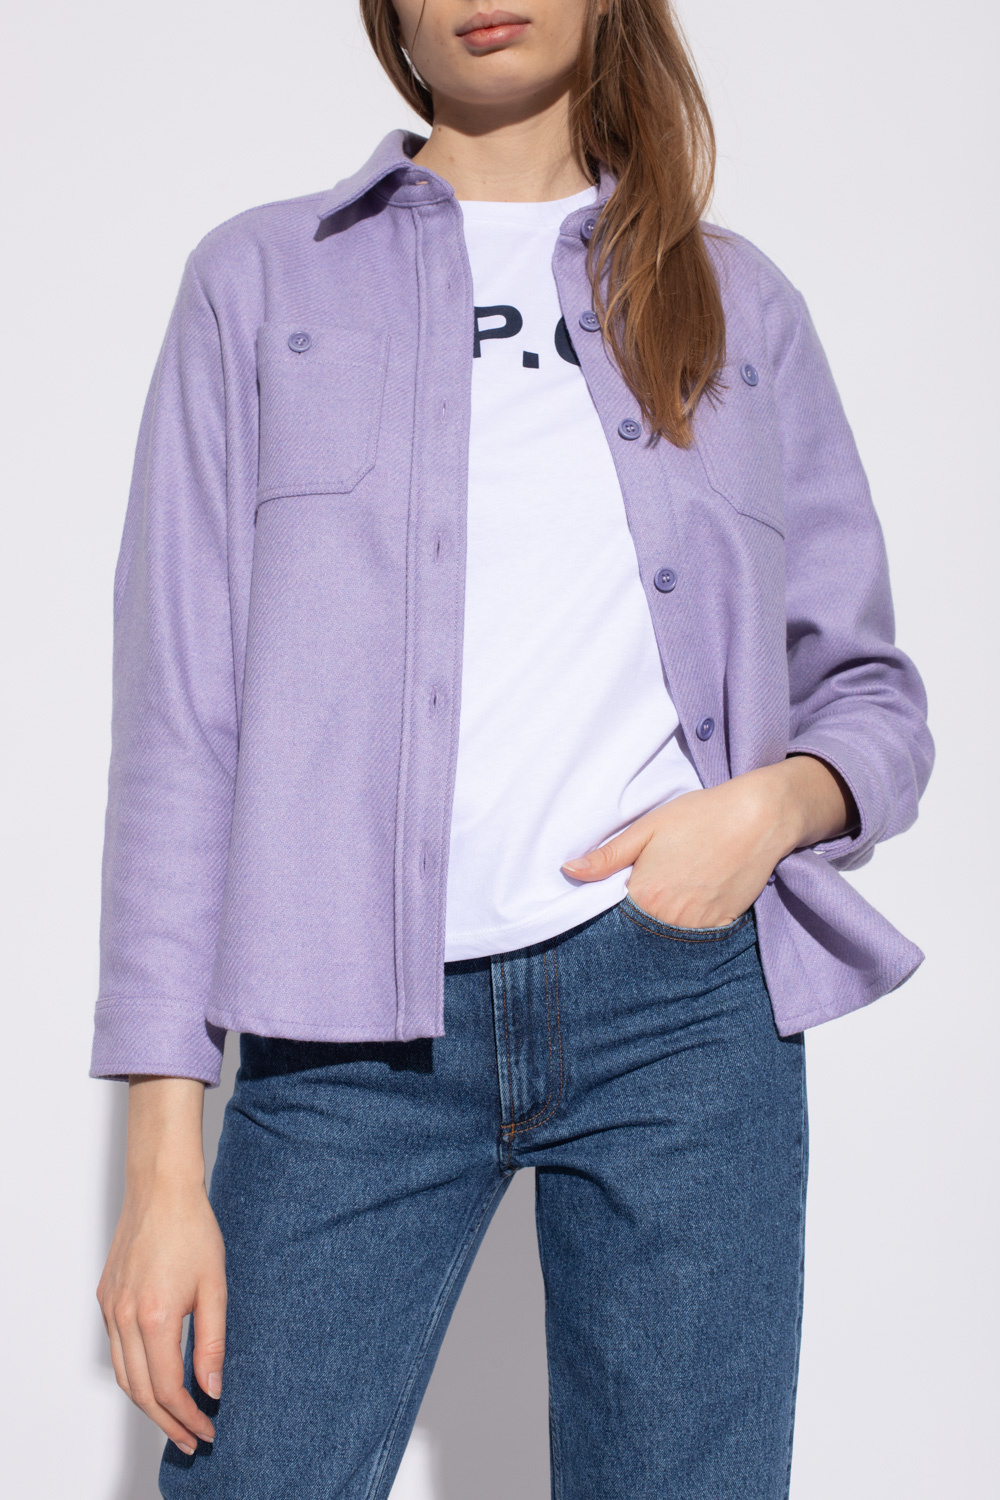 A.P.C. womens raw by raw clothing